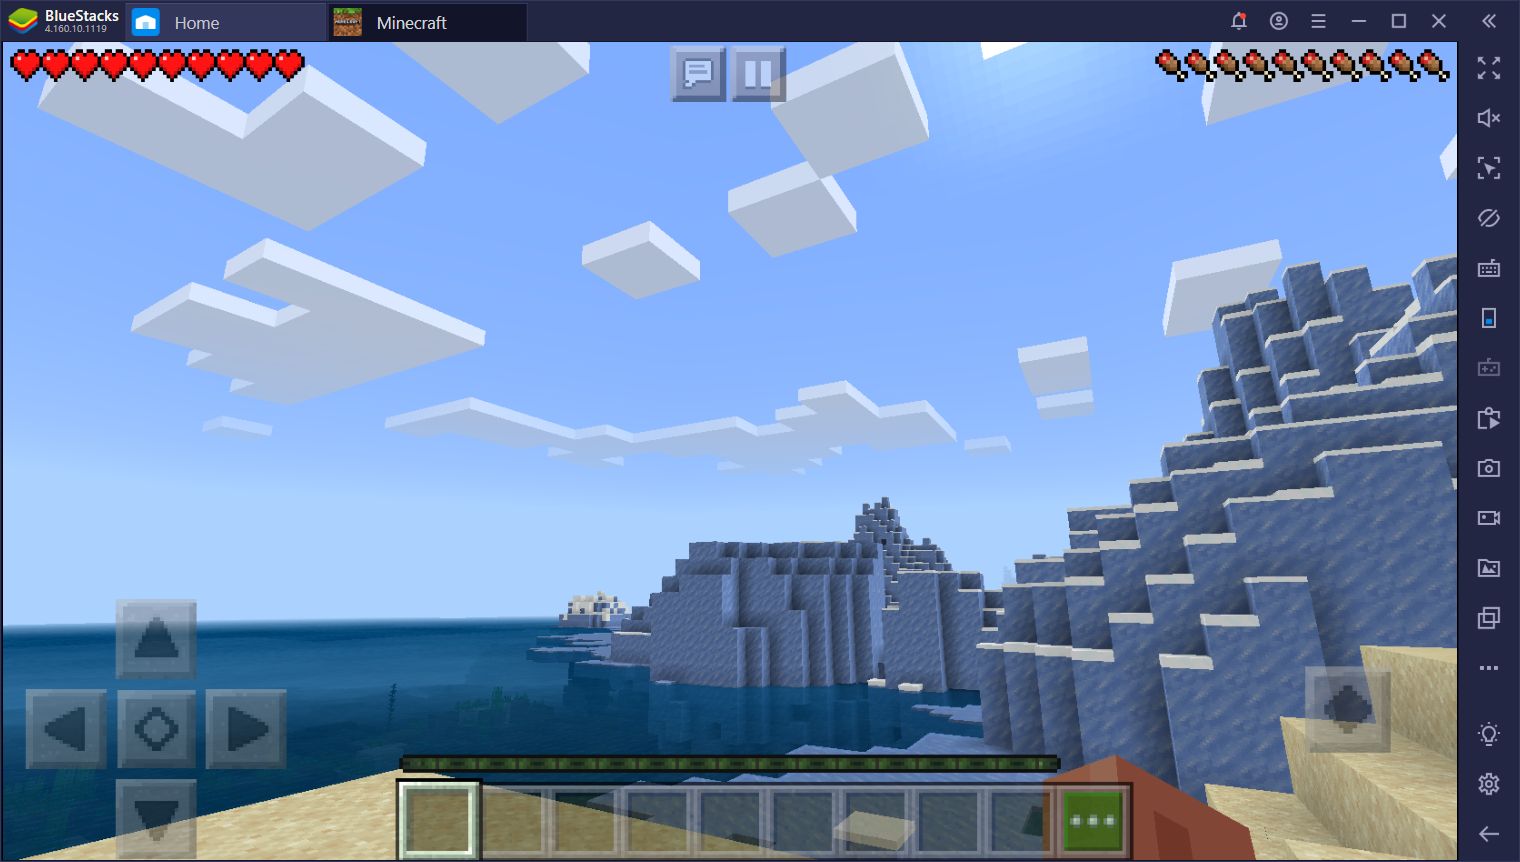 Minecraft on PC is Now Available on BlueStacks